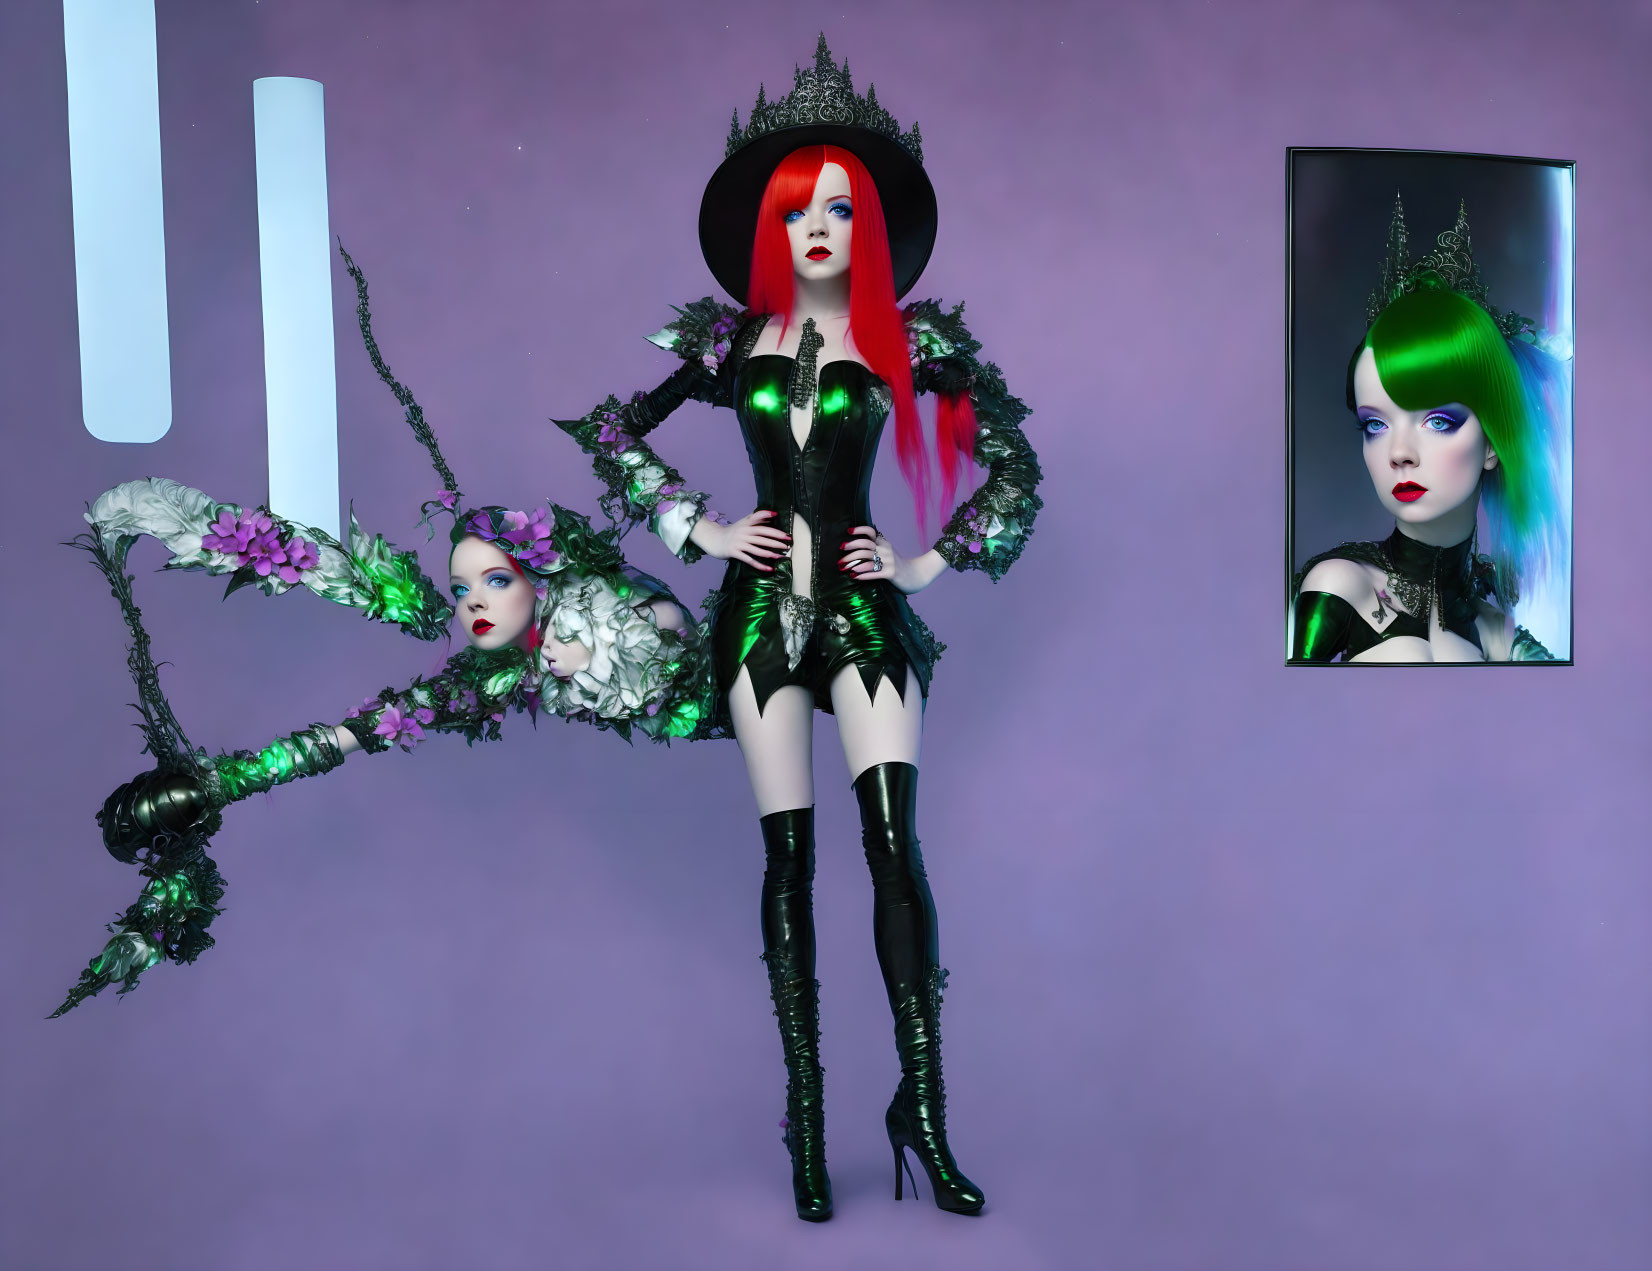 Red-haired figure in black outfit with hat on purple background with fantastical mannequin parts